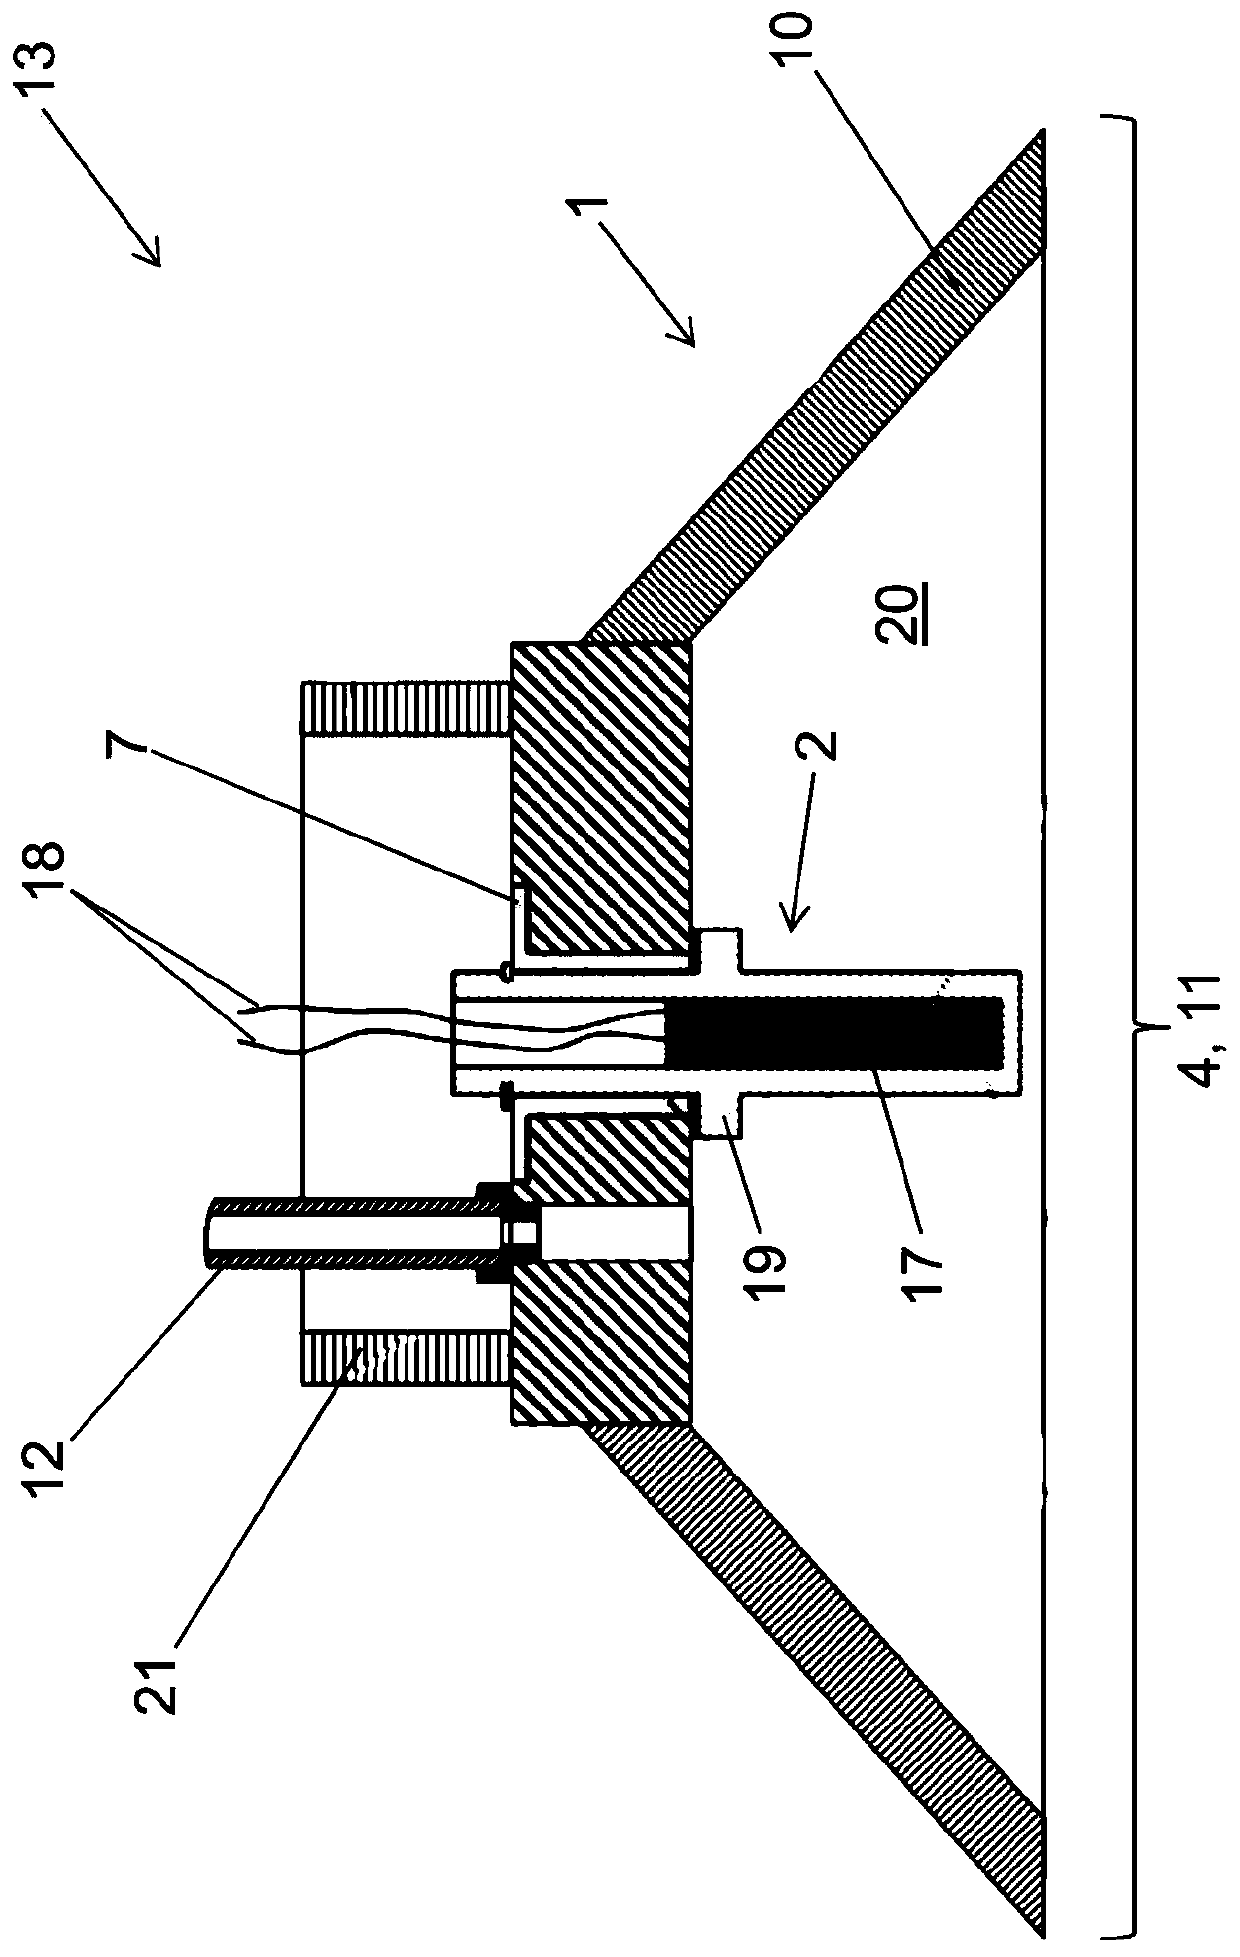 Apparatus for handling and locally fixing flat thermoplastic materials